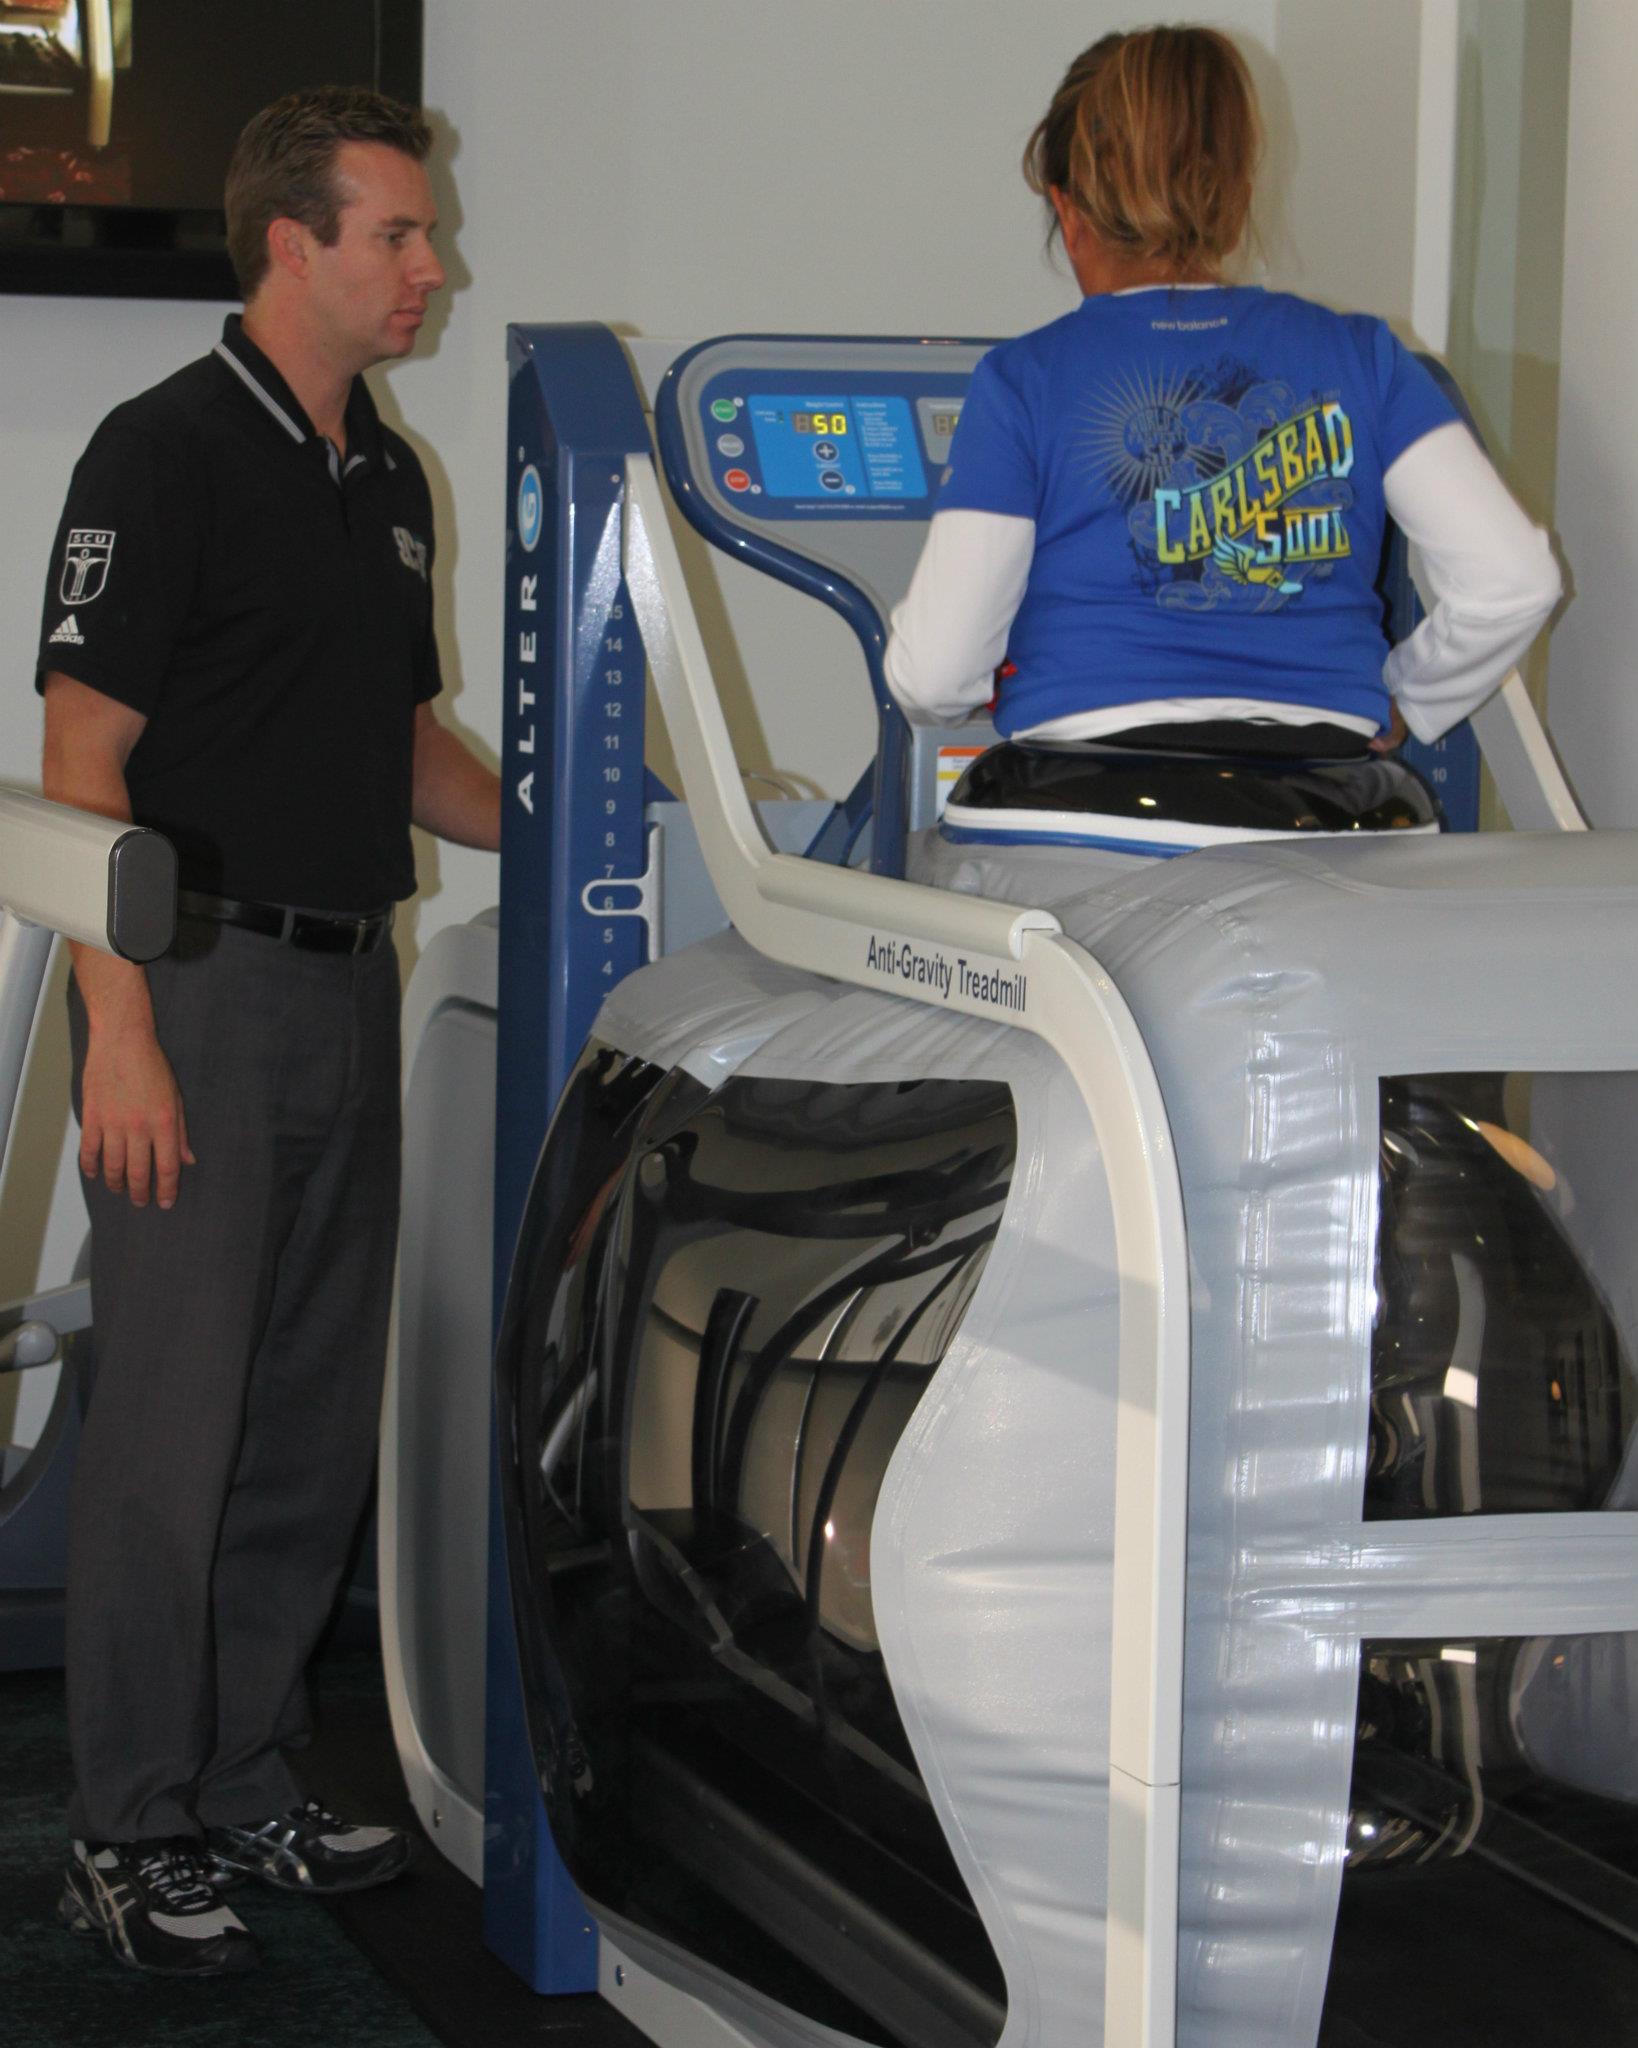 New Alter-G Technology at FORMA and What it means for you.